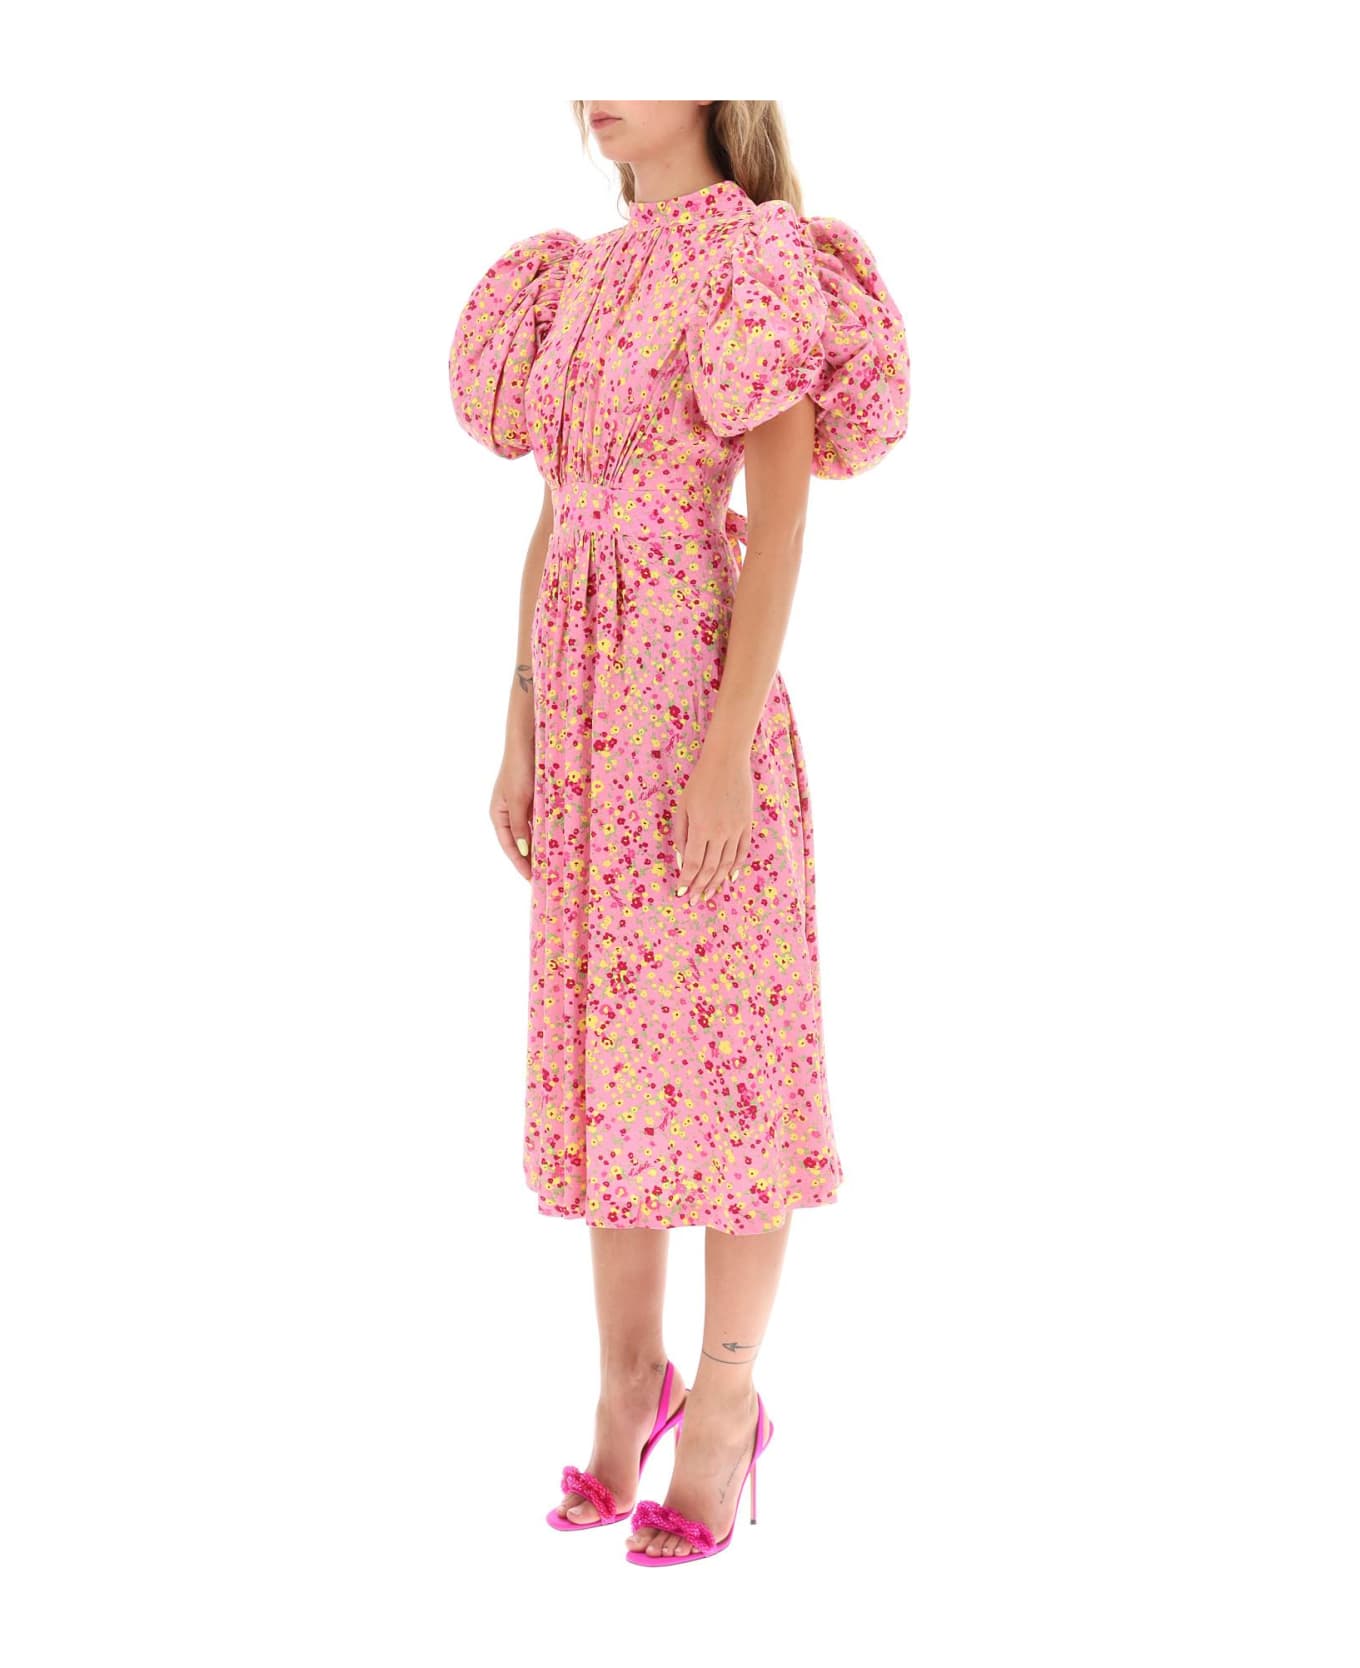 Rotate by Birger Christensen Jacquard Dress With Puffy Sleeves - FUCHSIA PINK COMB (Pink)